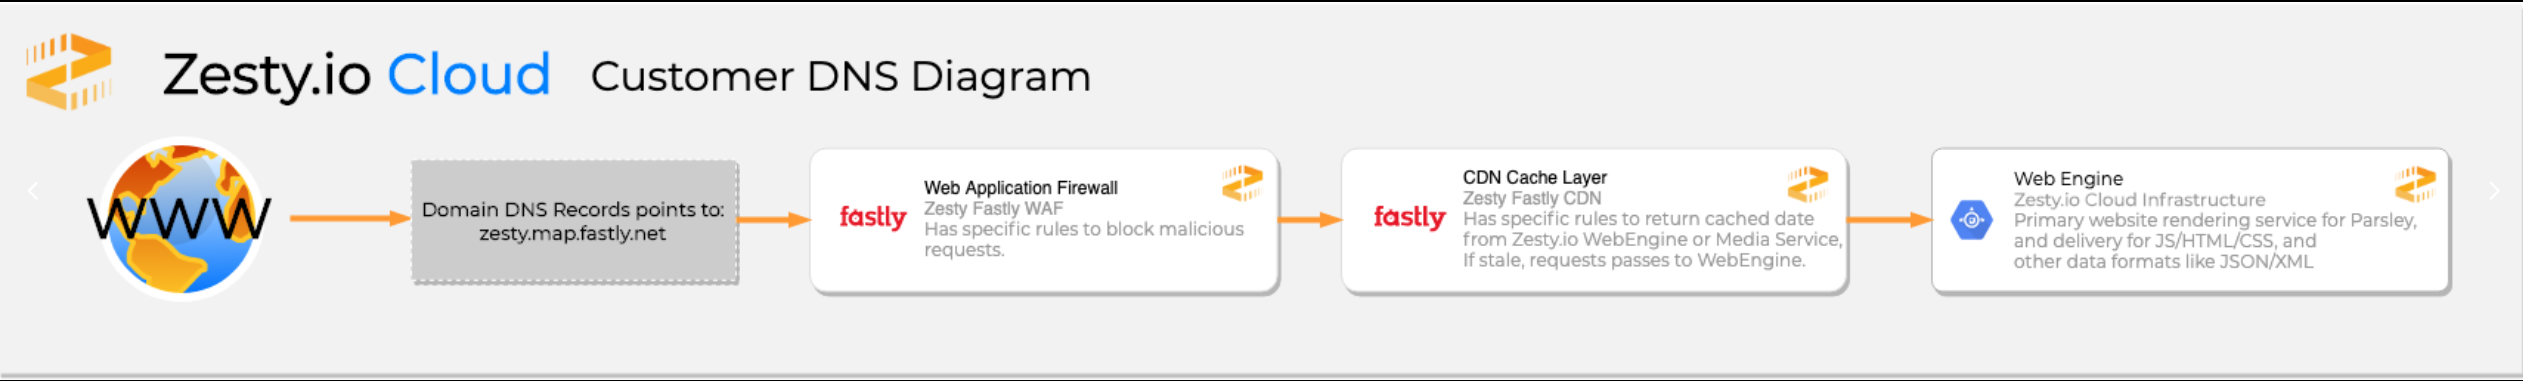 Standard WWW sub-domain request flow for Customers on Zesty.io Cloud